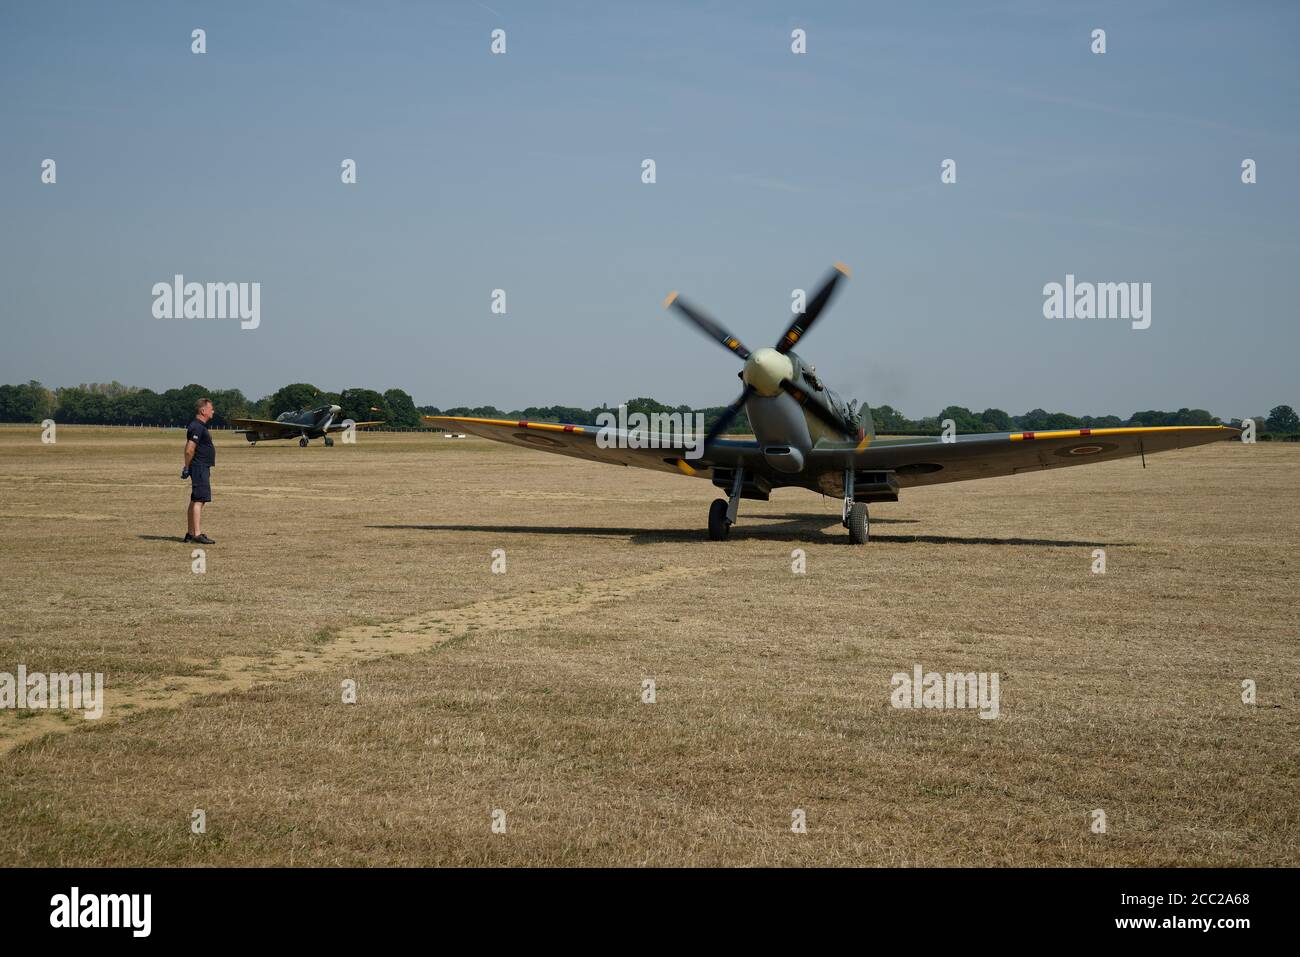 A pair of Spitfire fighter planes at Headcorn airfield in Kent. Taxiing after landing. Stock Photo